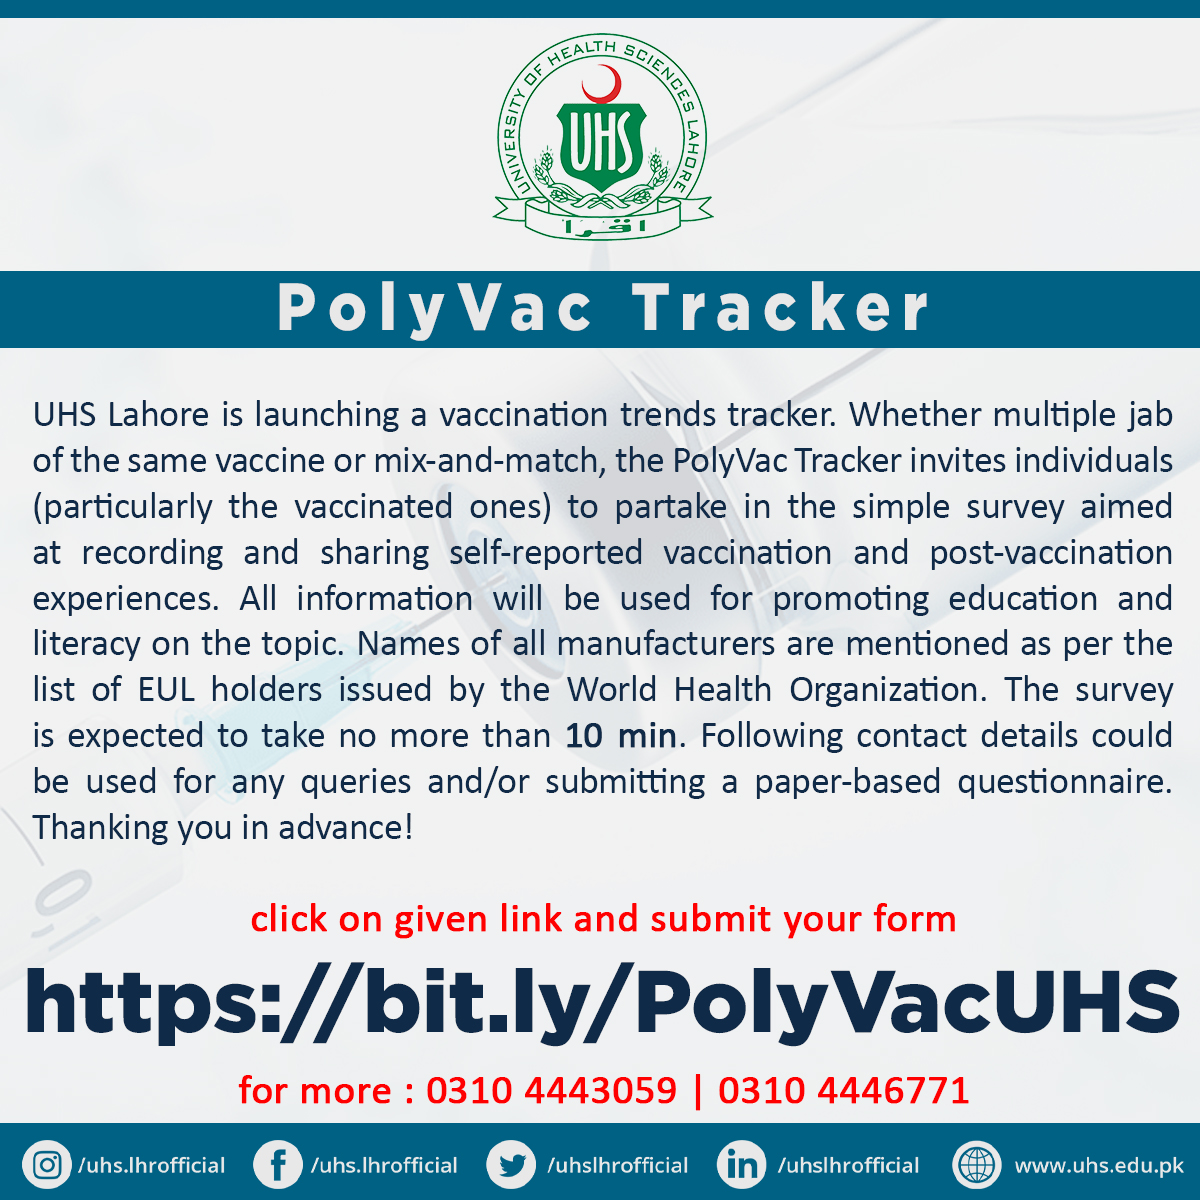 UHS Lahore is launching a vaccination trends tracker. The survey is expected to take no more than 10 min. Following contact details could be used for any queries and/or submitting a paper-based questionnaire. Click here to fill the form: bit.ly/PolyVacUHS